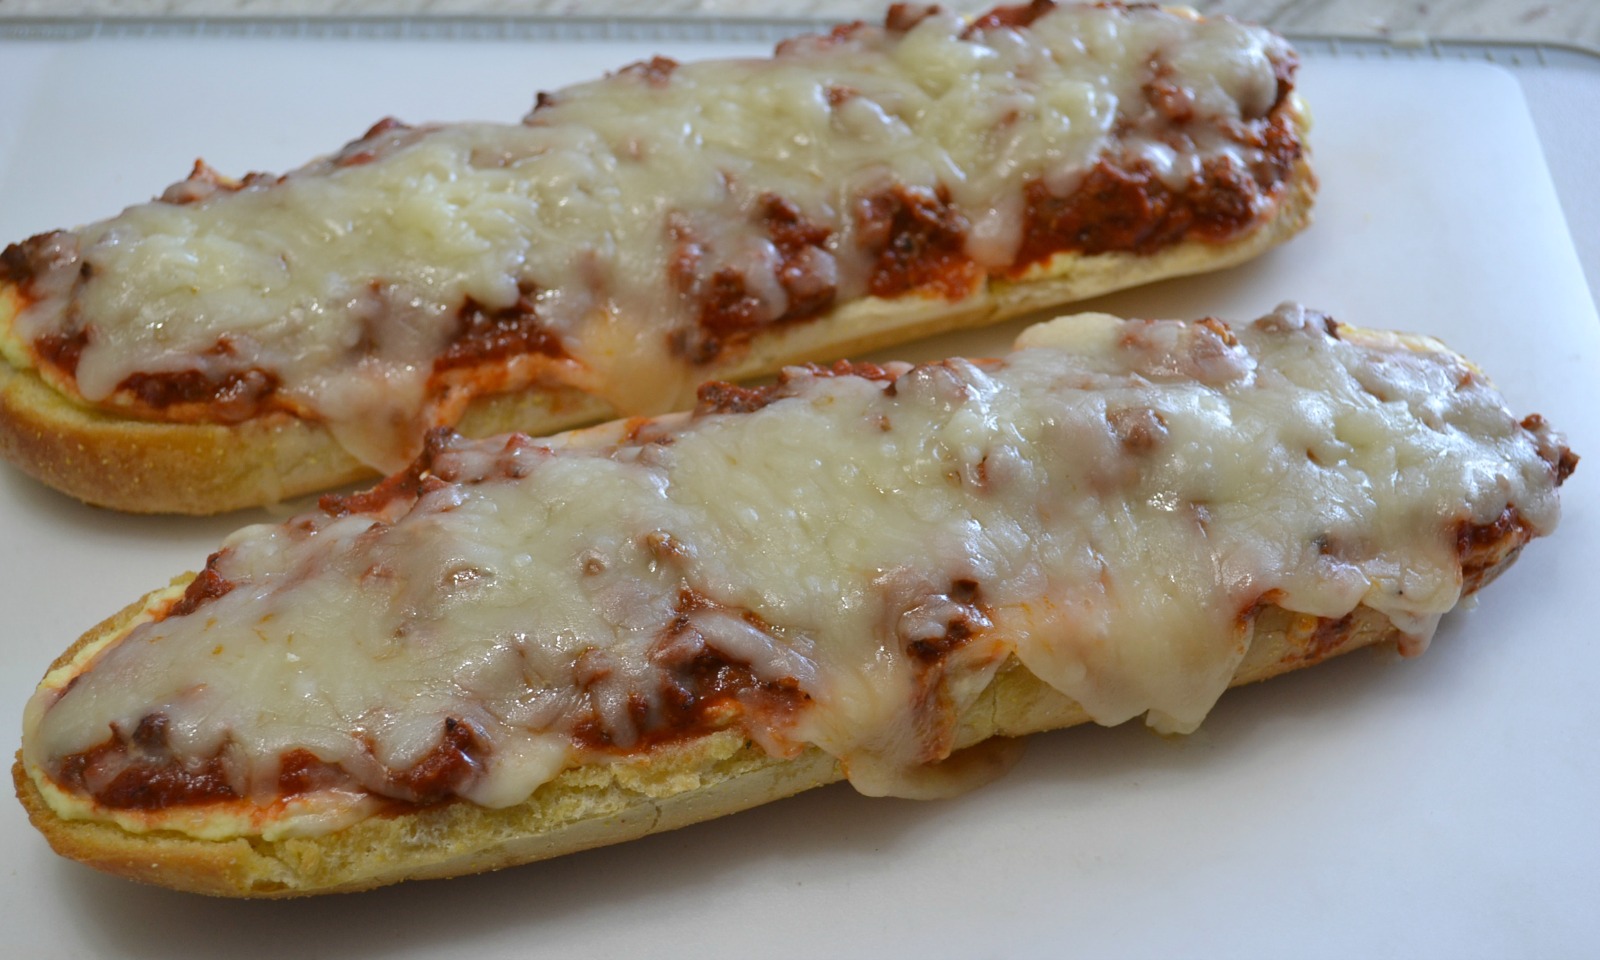 Loaves of garlic bread topped with a ricotta cheese layer, a meat sauce, and lots of melted mozzarella cheese. Perfect for dinner or cut into smaller pieces as an appetizer.